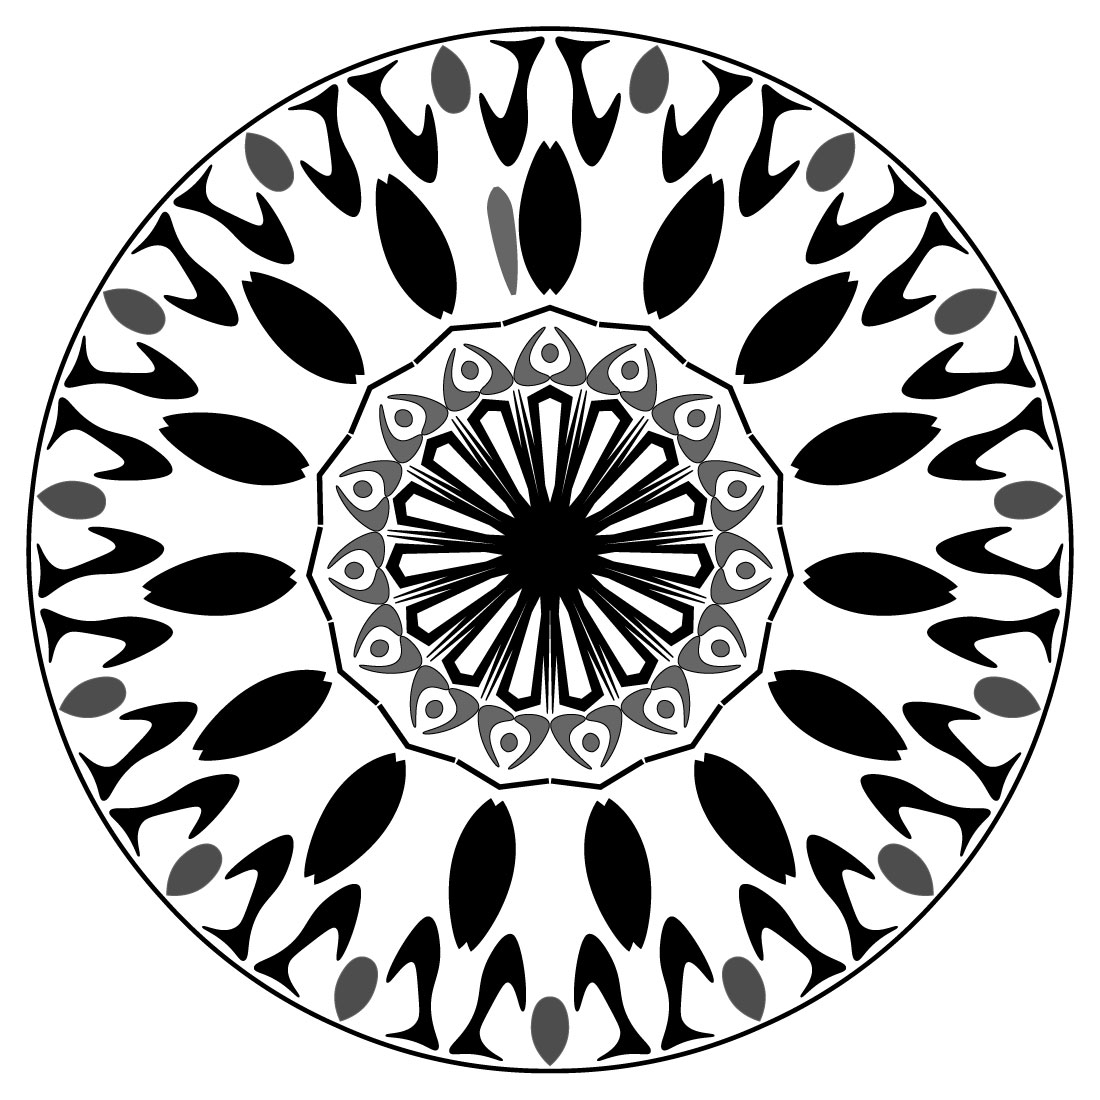 Mandala-Art-with-rounded-black-and-white preview image.